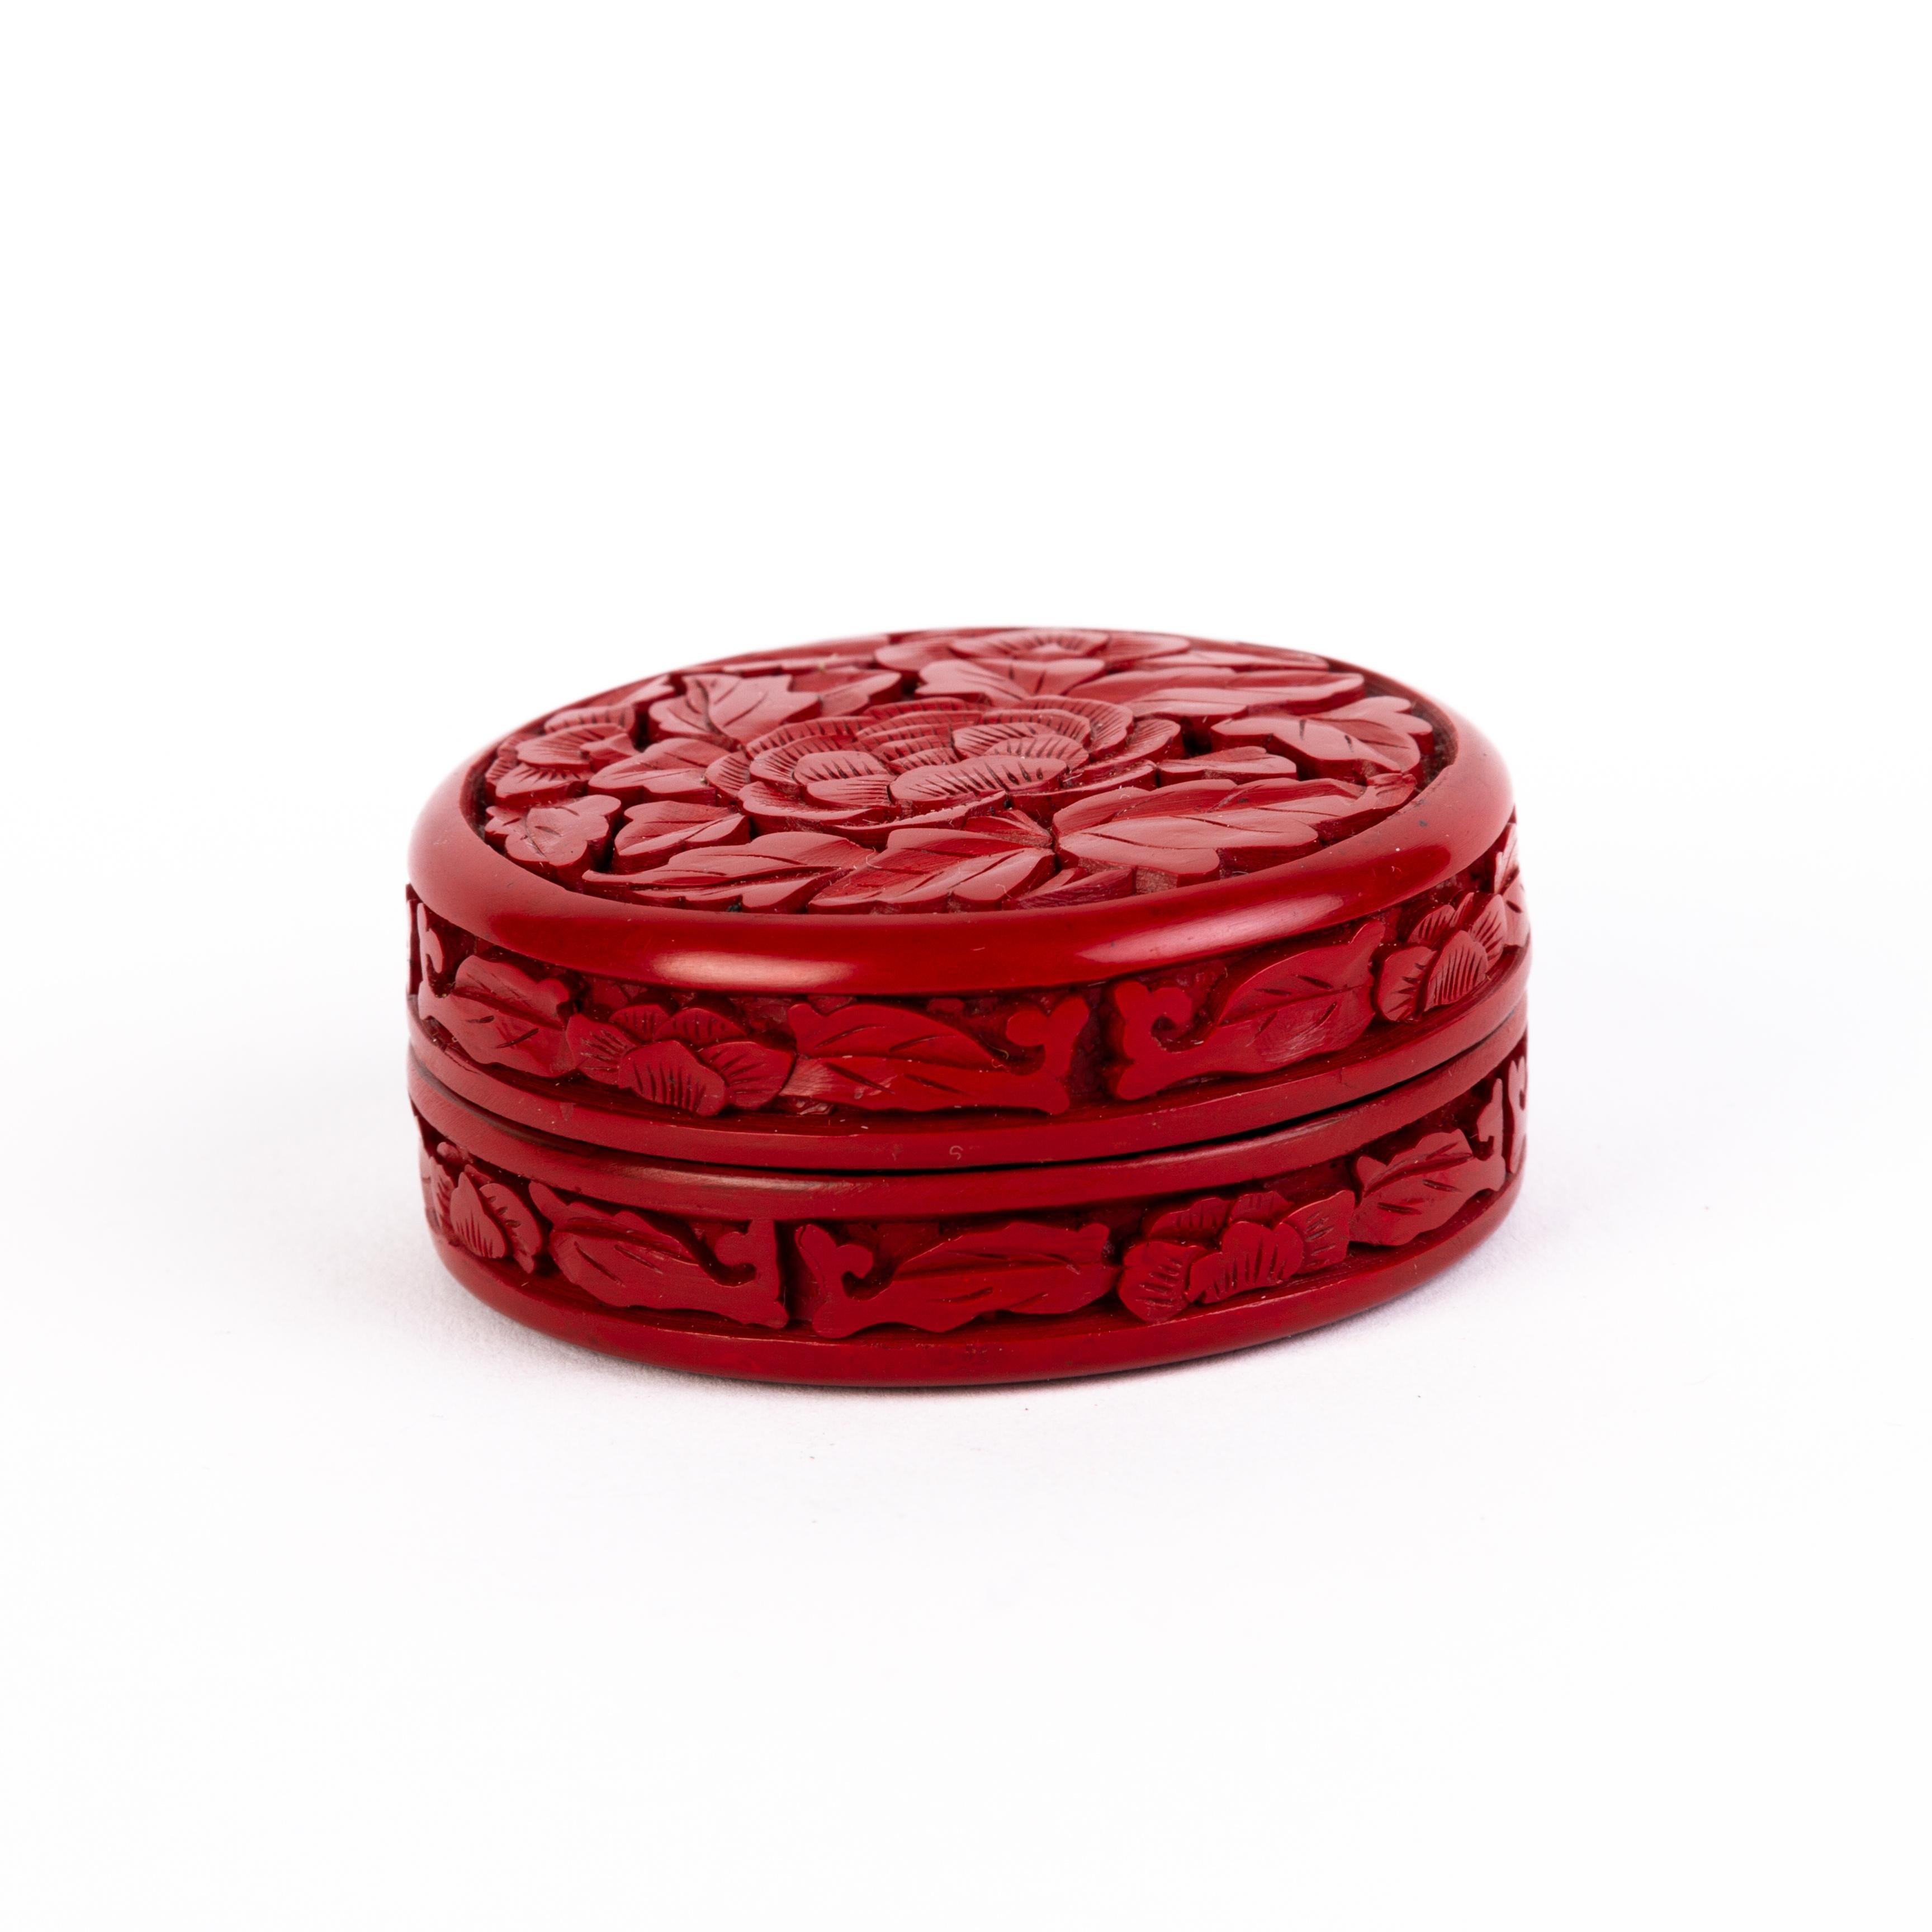 Chinese Qing Dynasty Carved Cinnabar Lacquer Circular Lidded Box circa 1900 For Sale 2